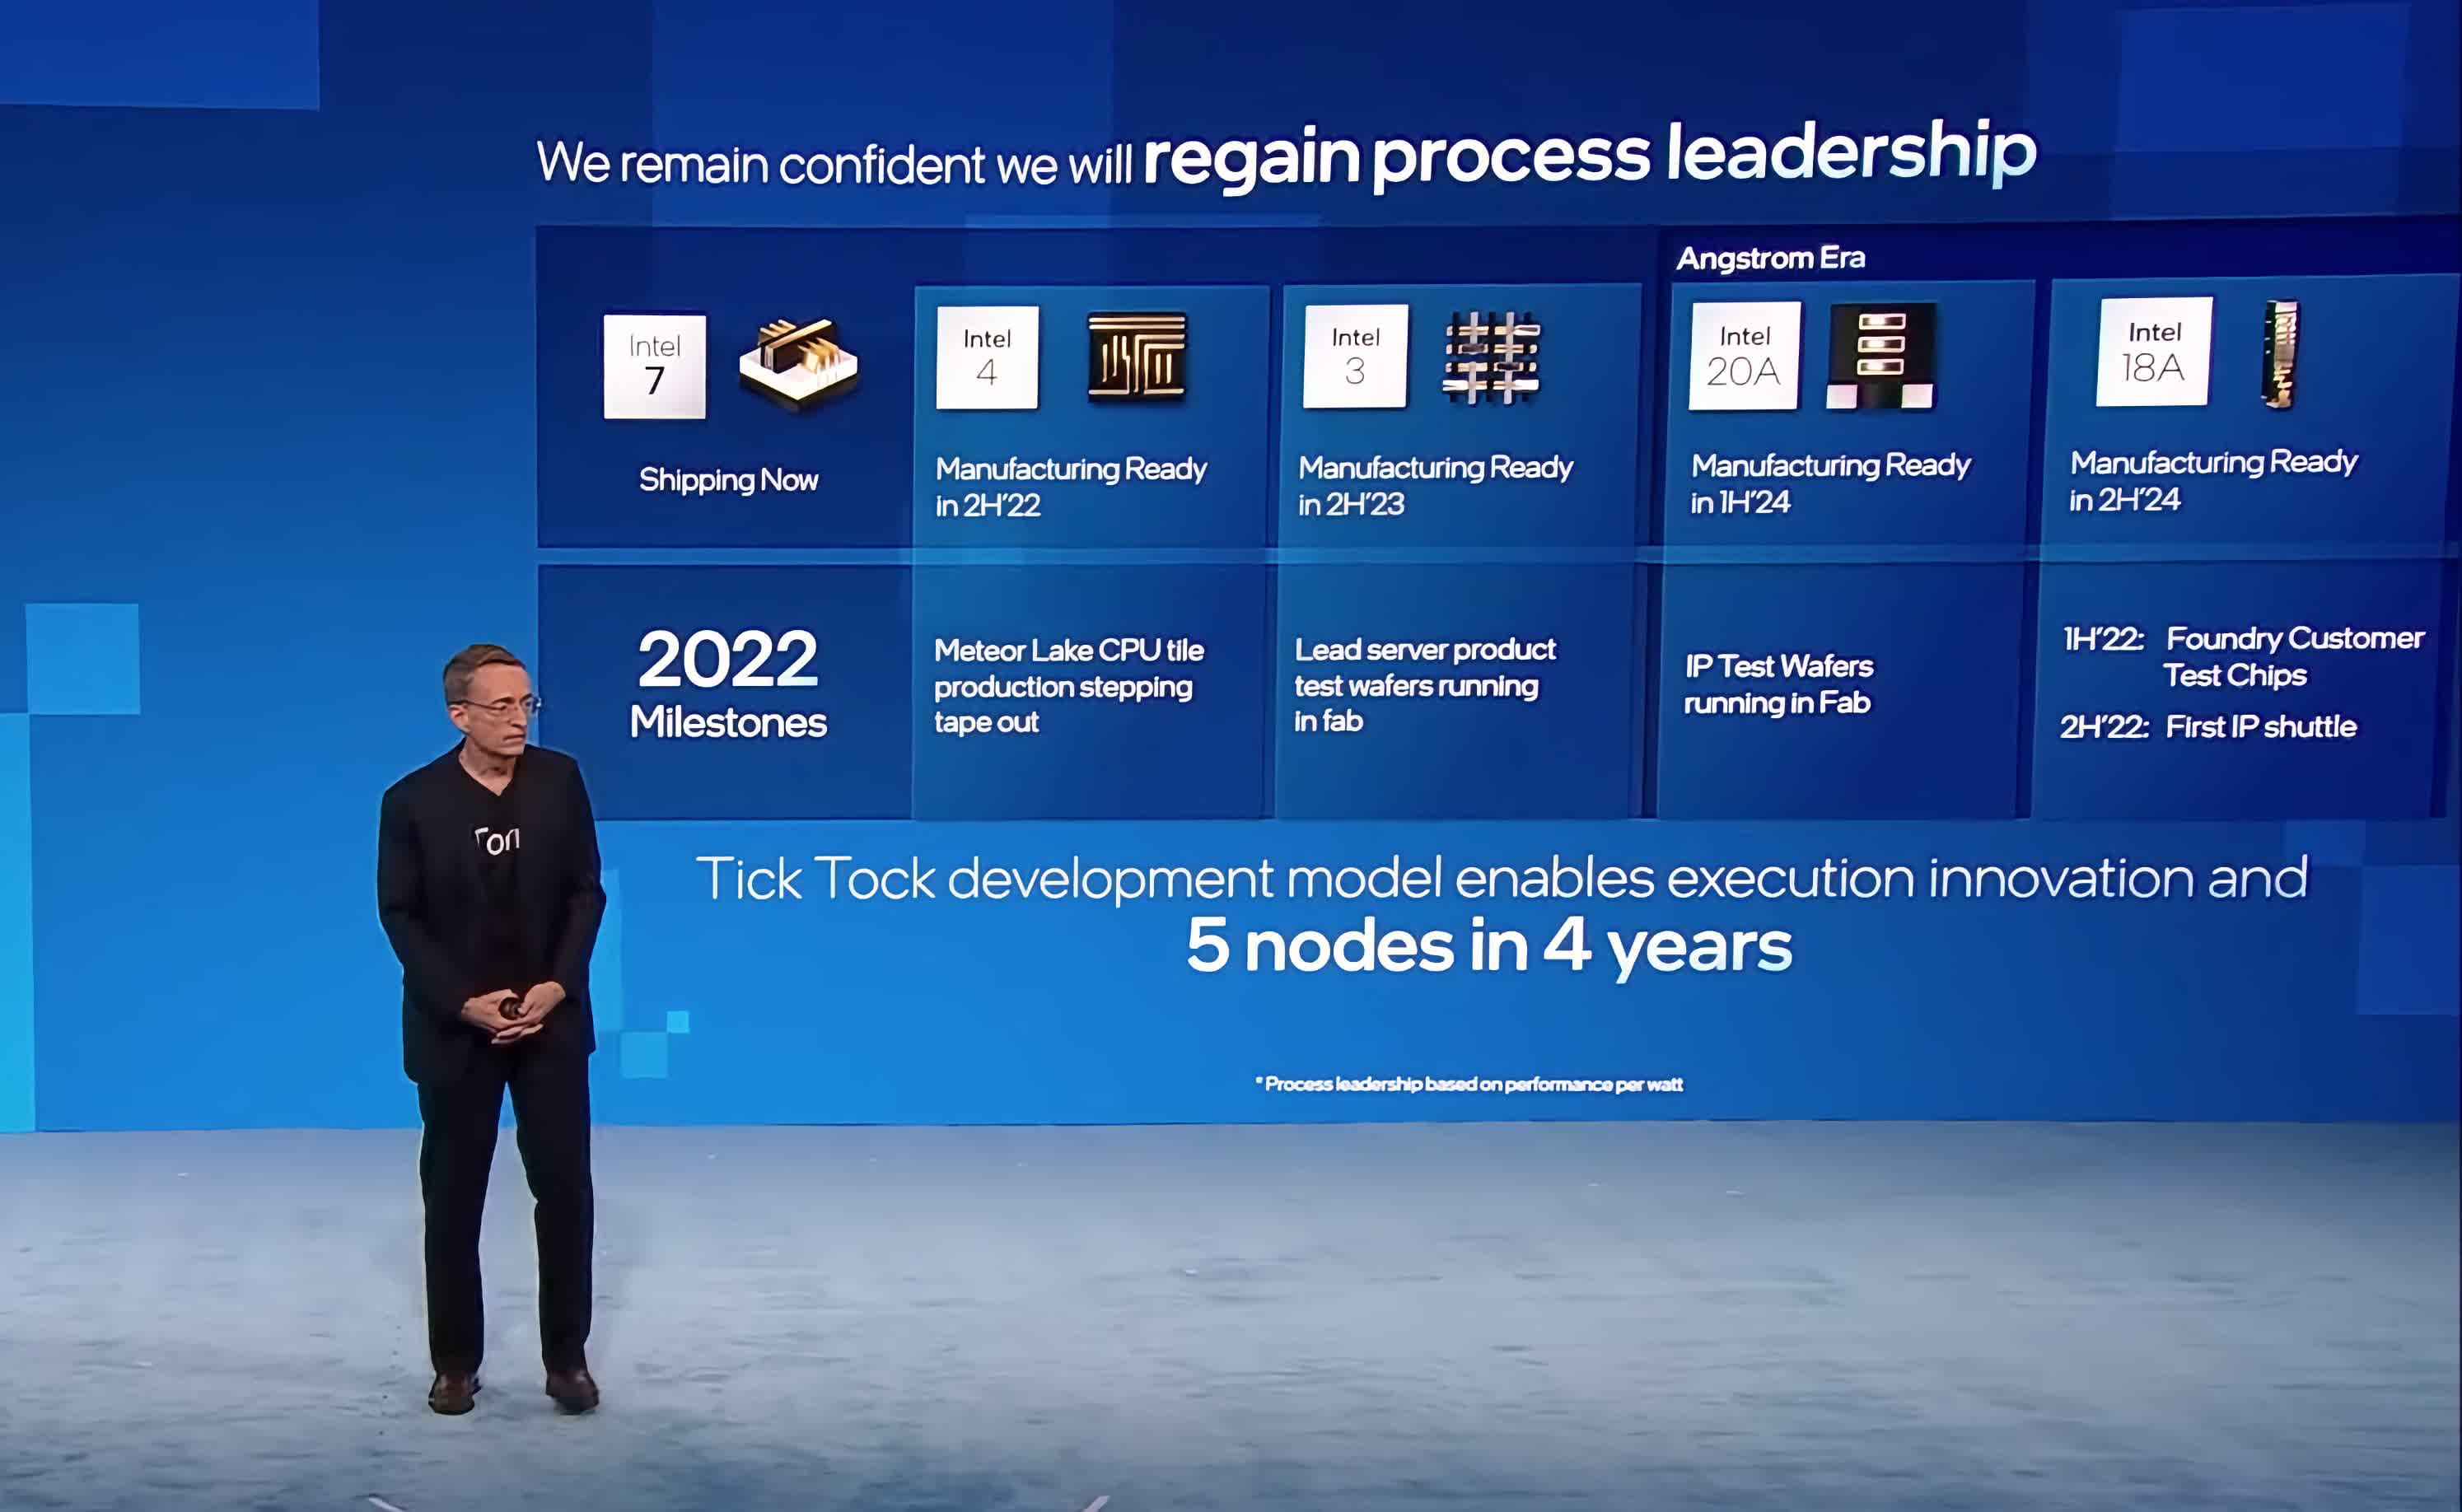 Intel unveils technology roadmap through 2024, Raptor Lake is coming later this year